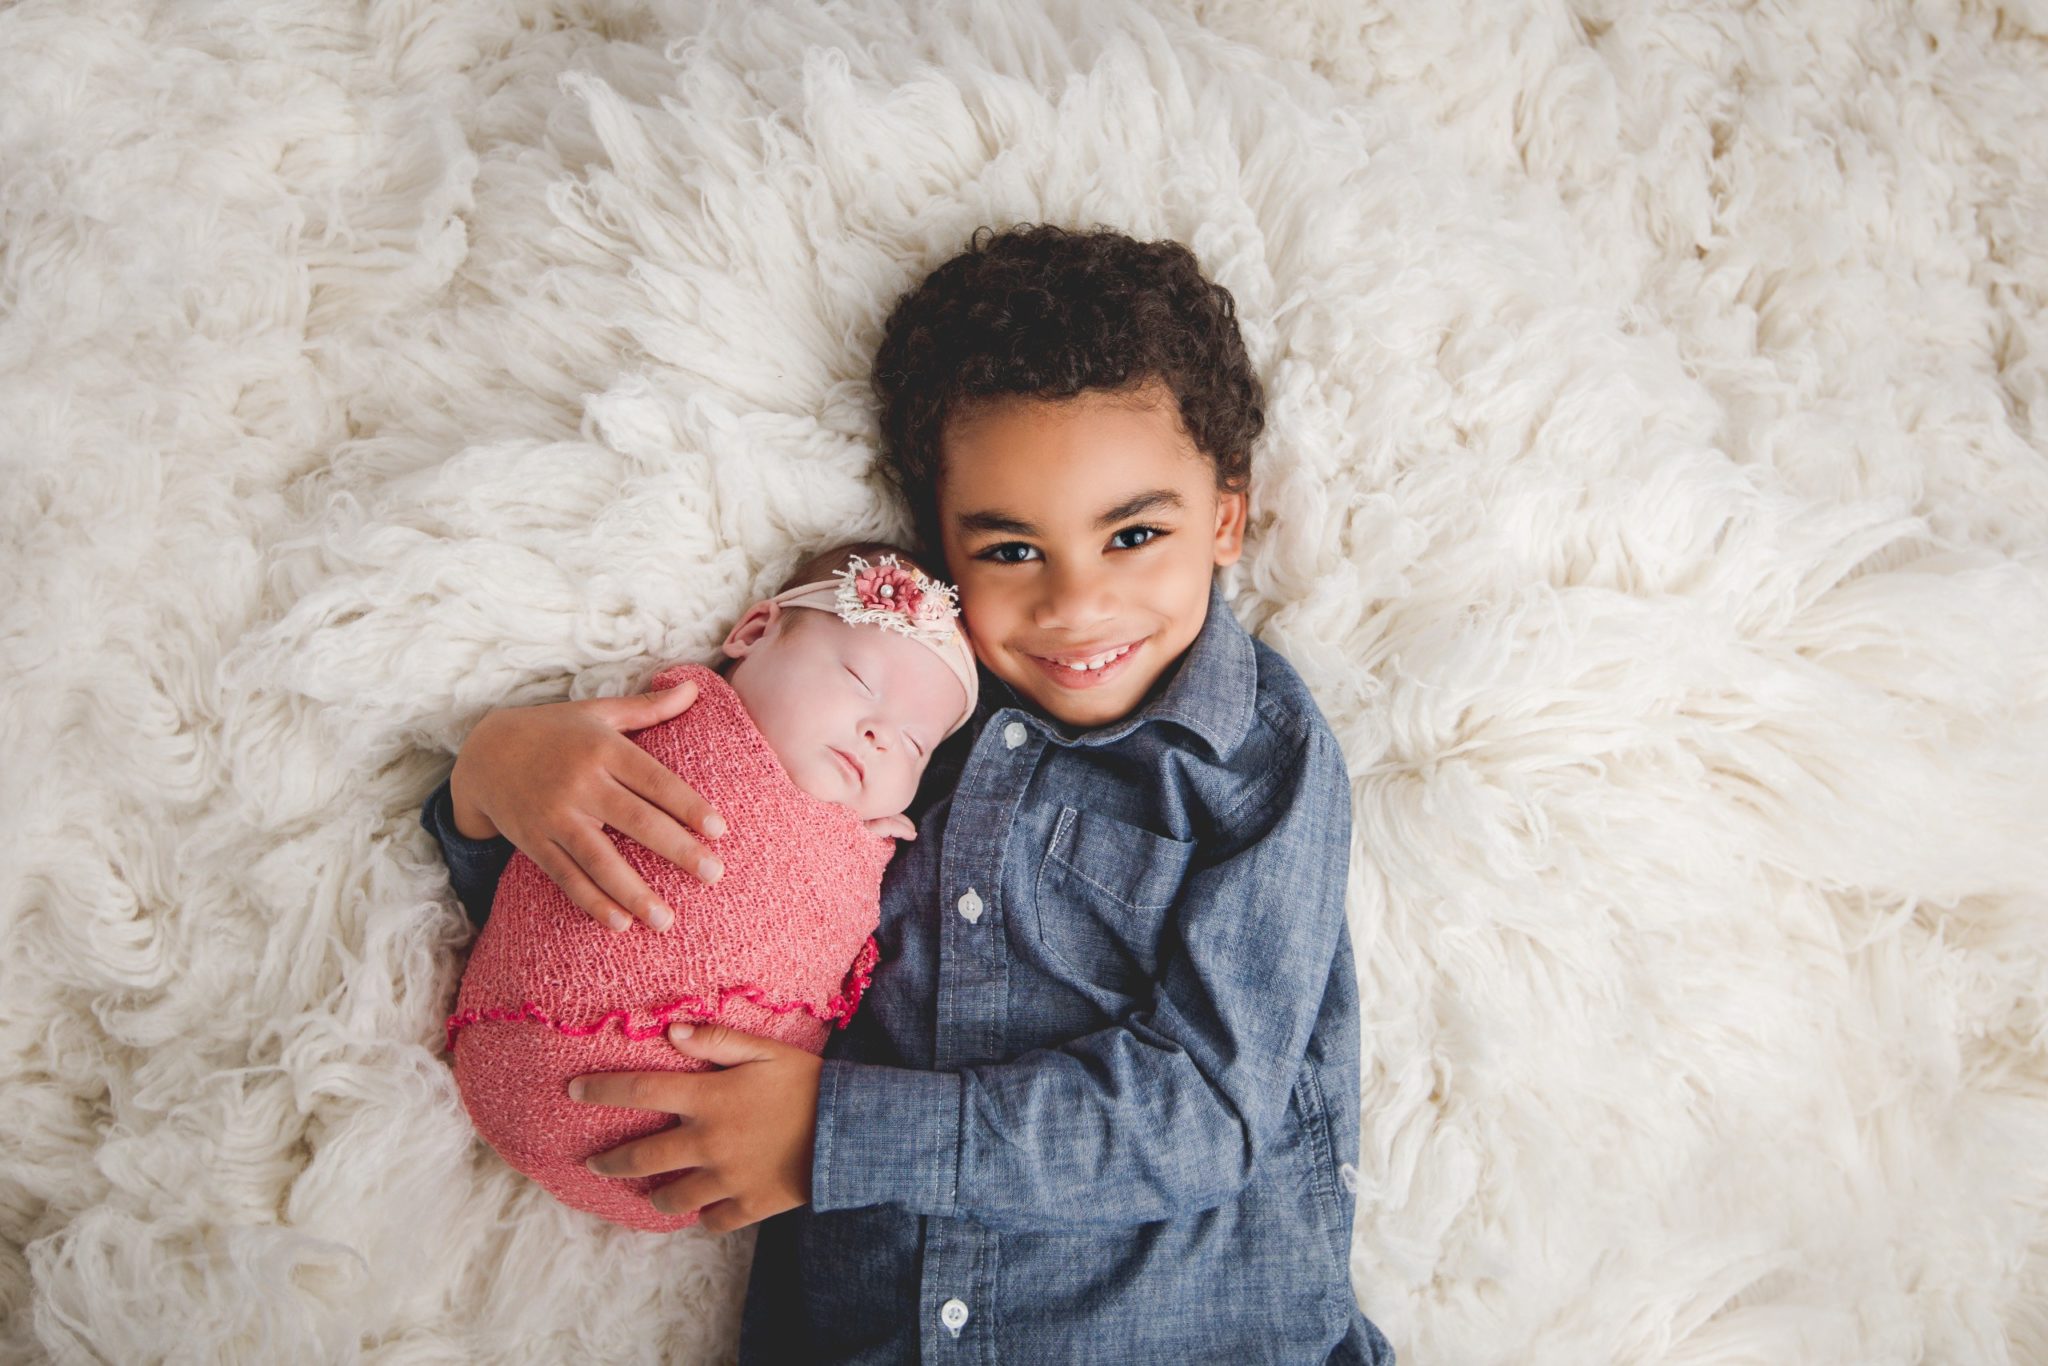 Newborn and sibling love on classic white fur background.